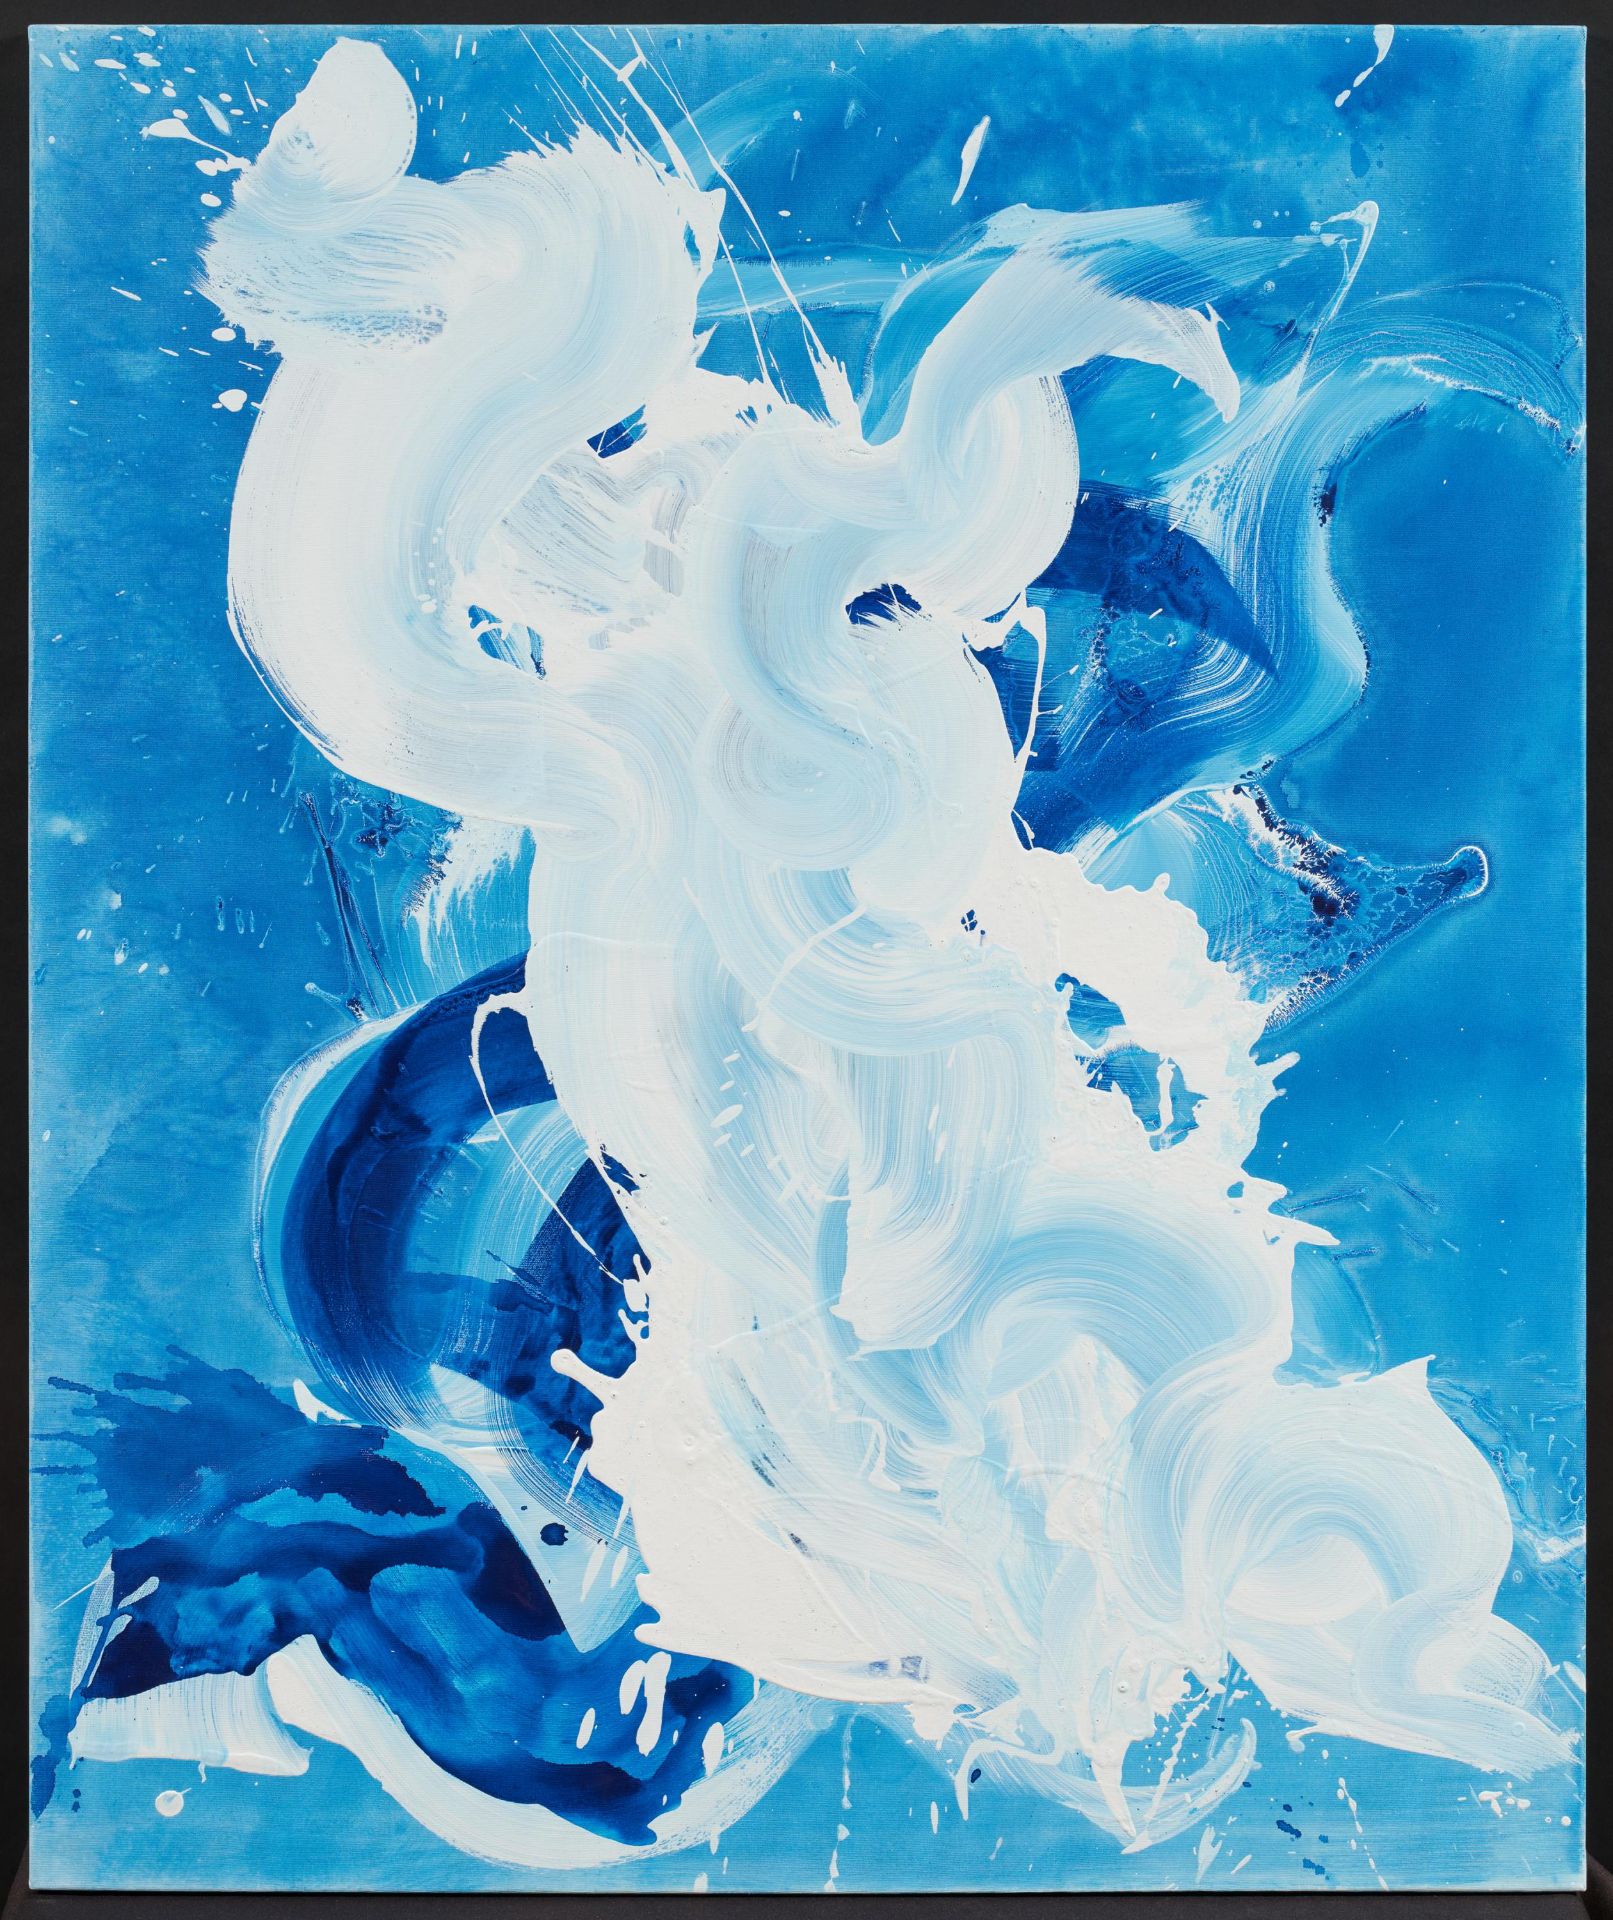 Conor Mccreedy: Blue and White Ocean - Image 3 of 8